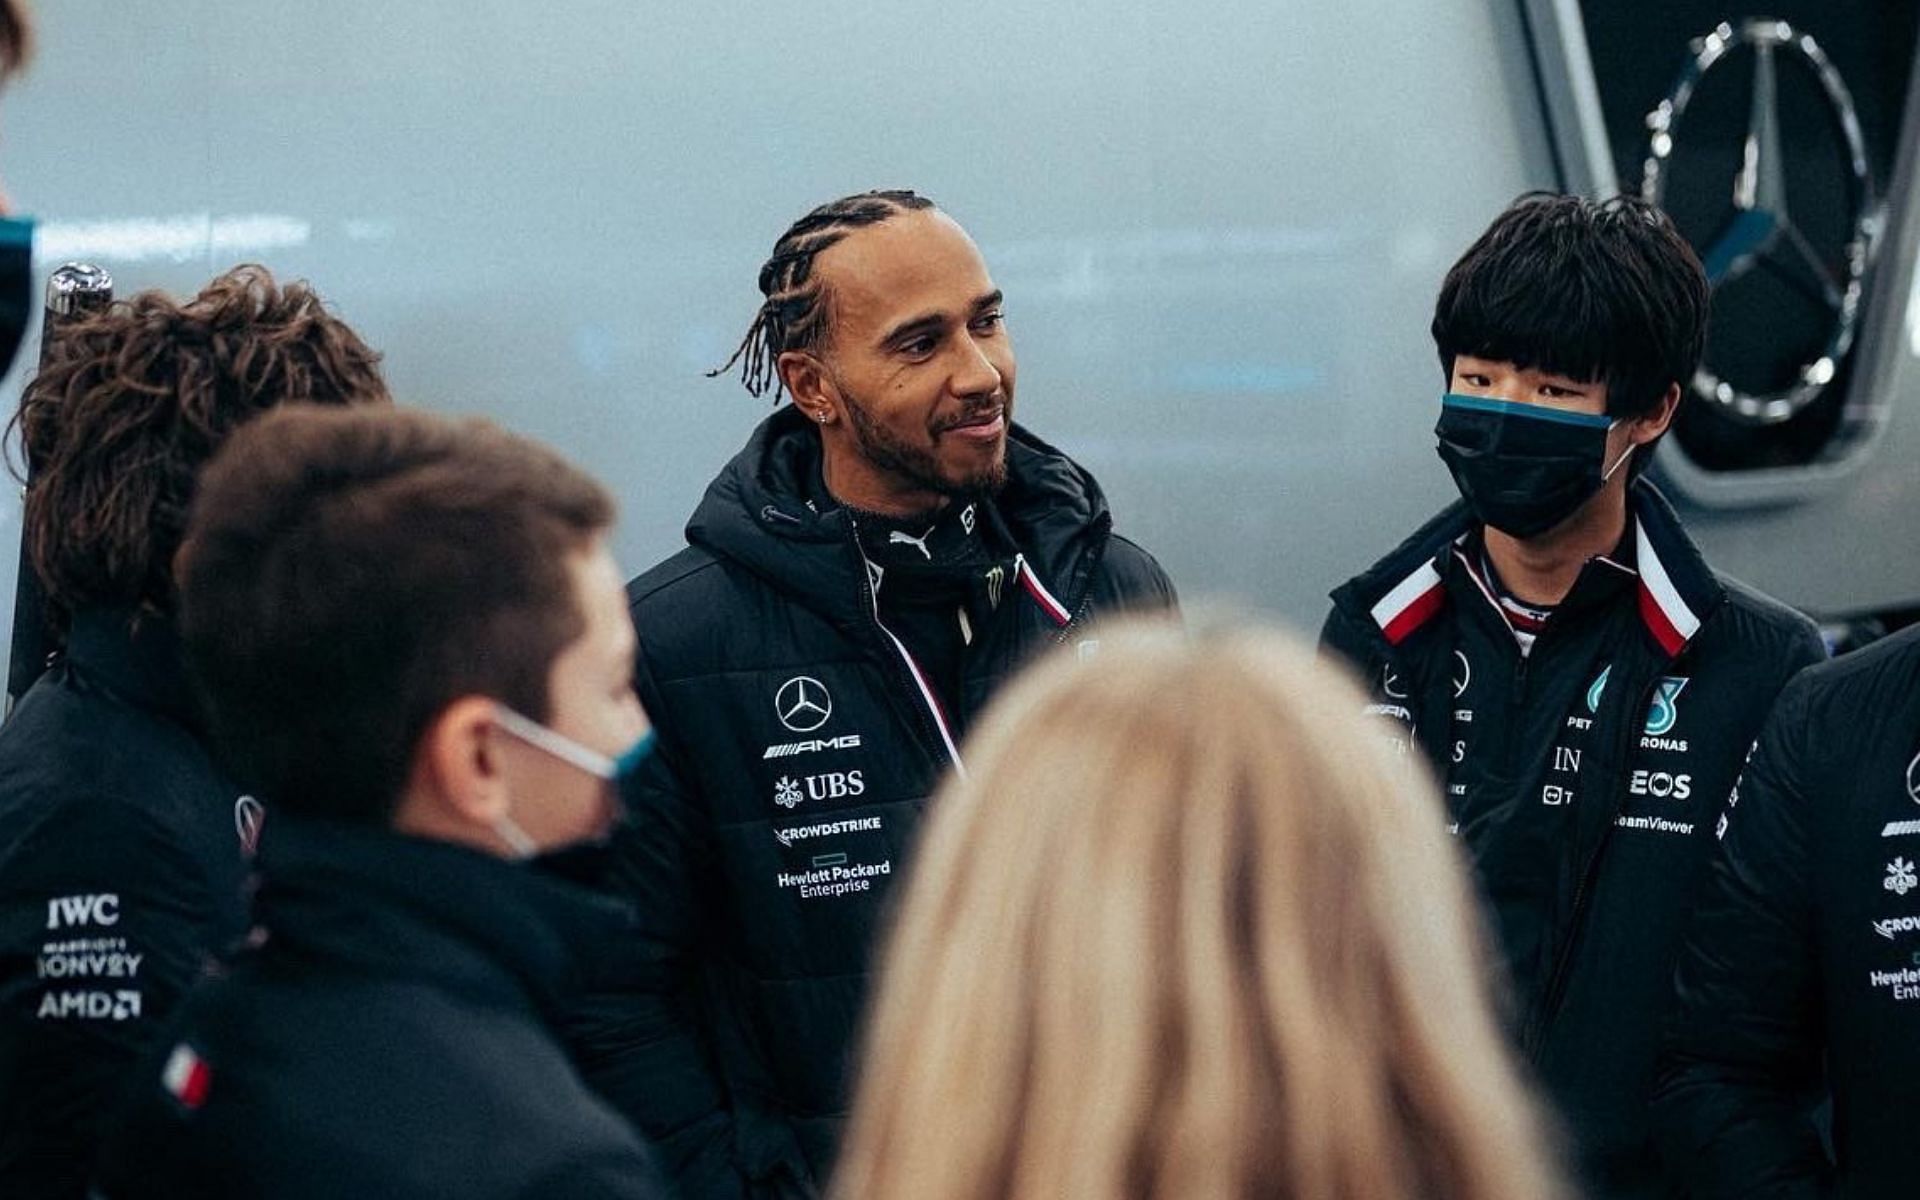 Lewis Hamilton interacts with his team members at Mercedes factory in Brackley. Image Courtesy: Twitter/@MercedesAMGF1